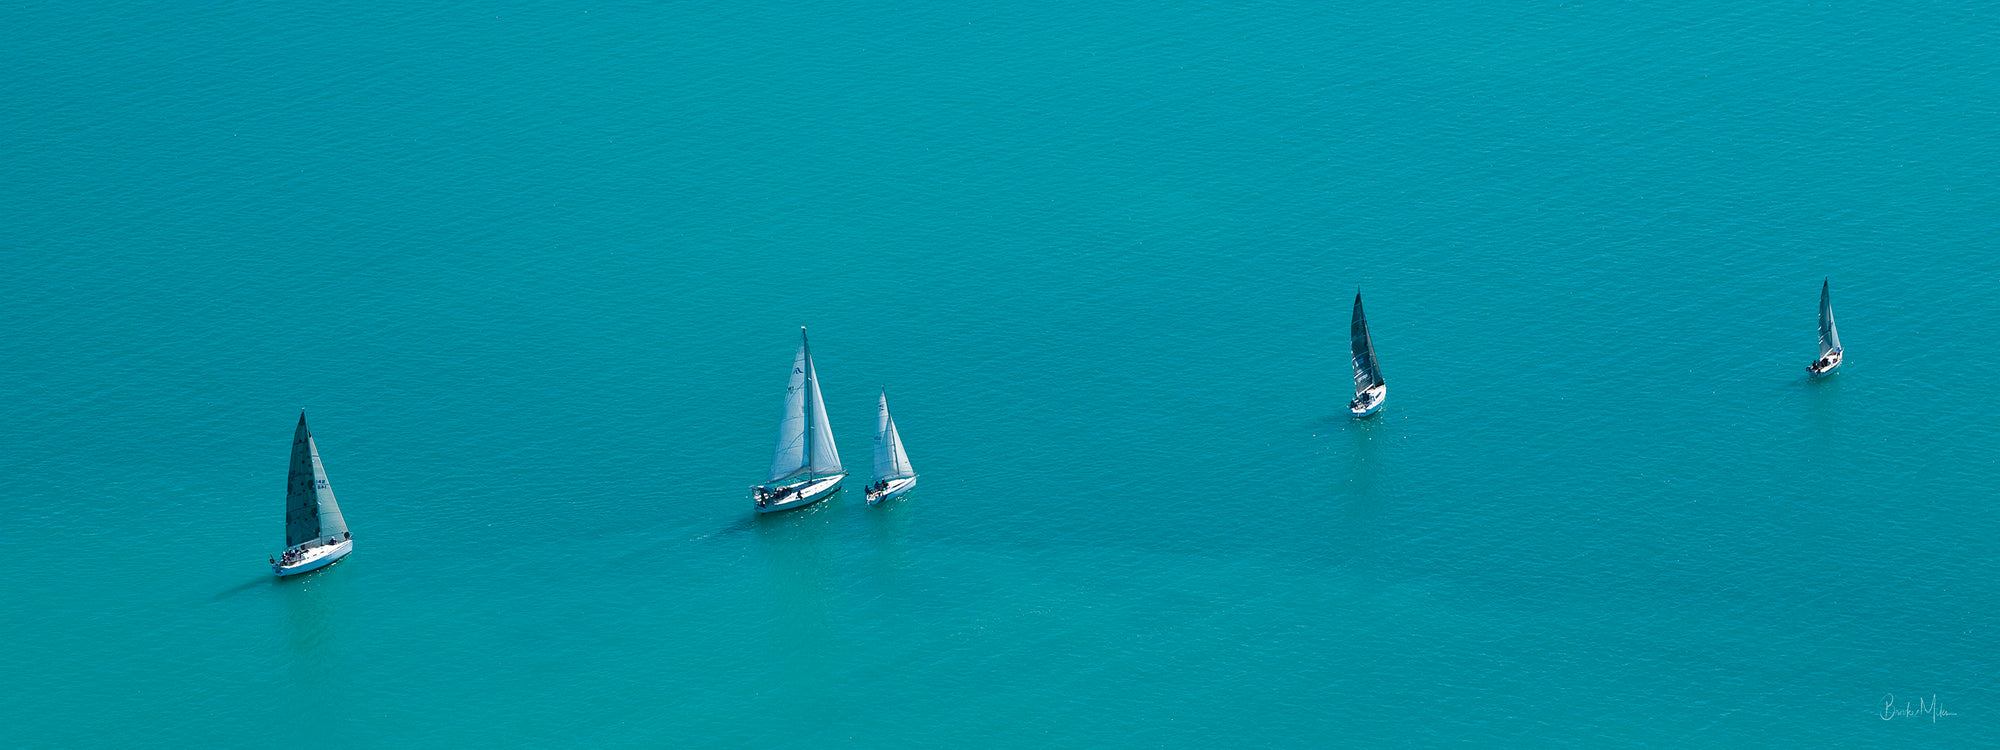 5 sailing vessels with their sails raised in a line, one behind the other with blue ocean surrounding them